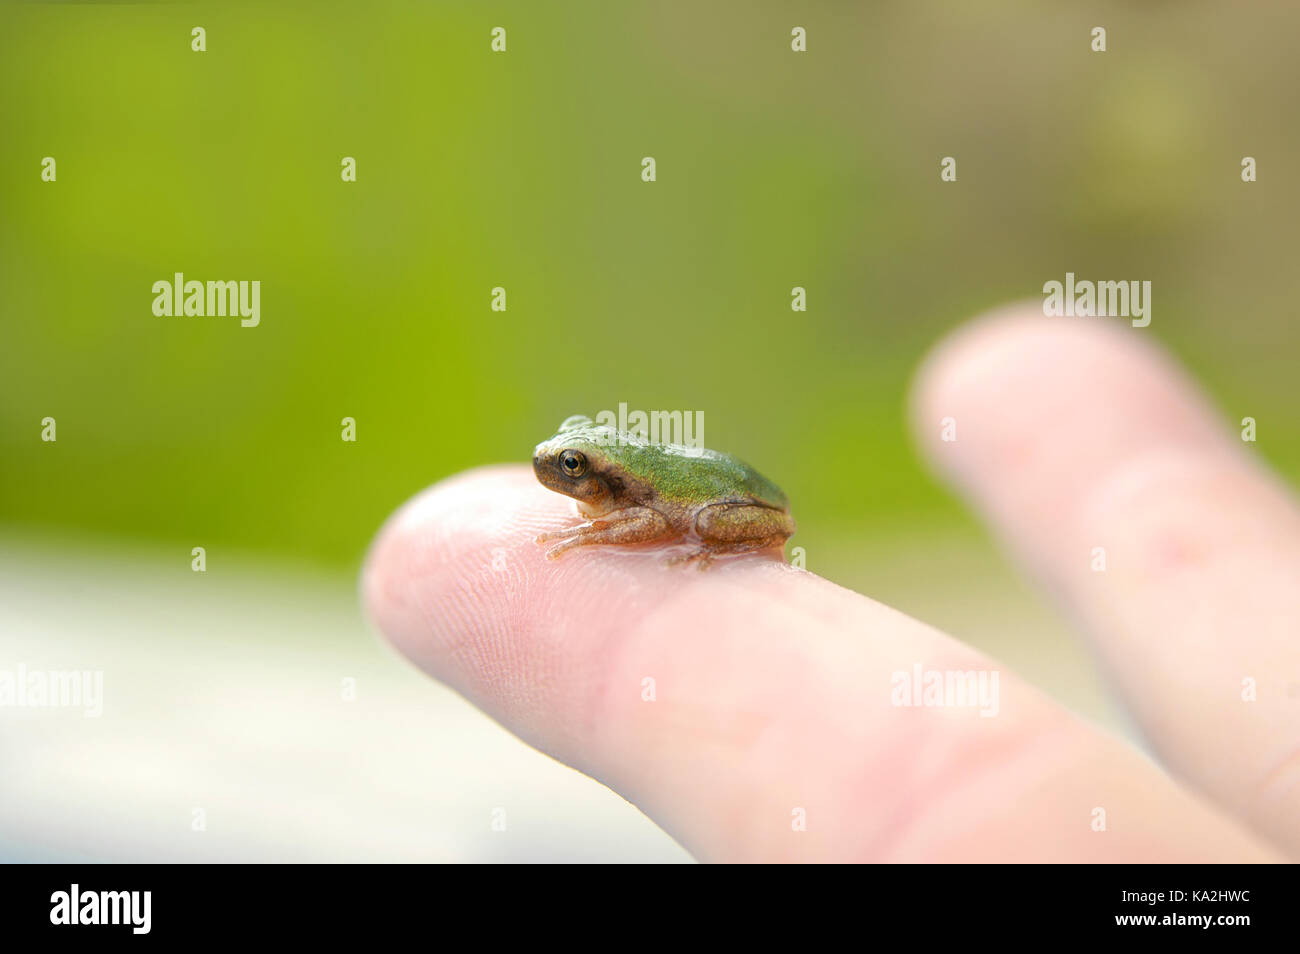 Tiny green, tree frog rests on extended finger showing its size small size. Stock Photo